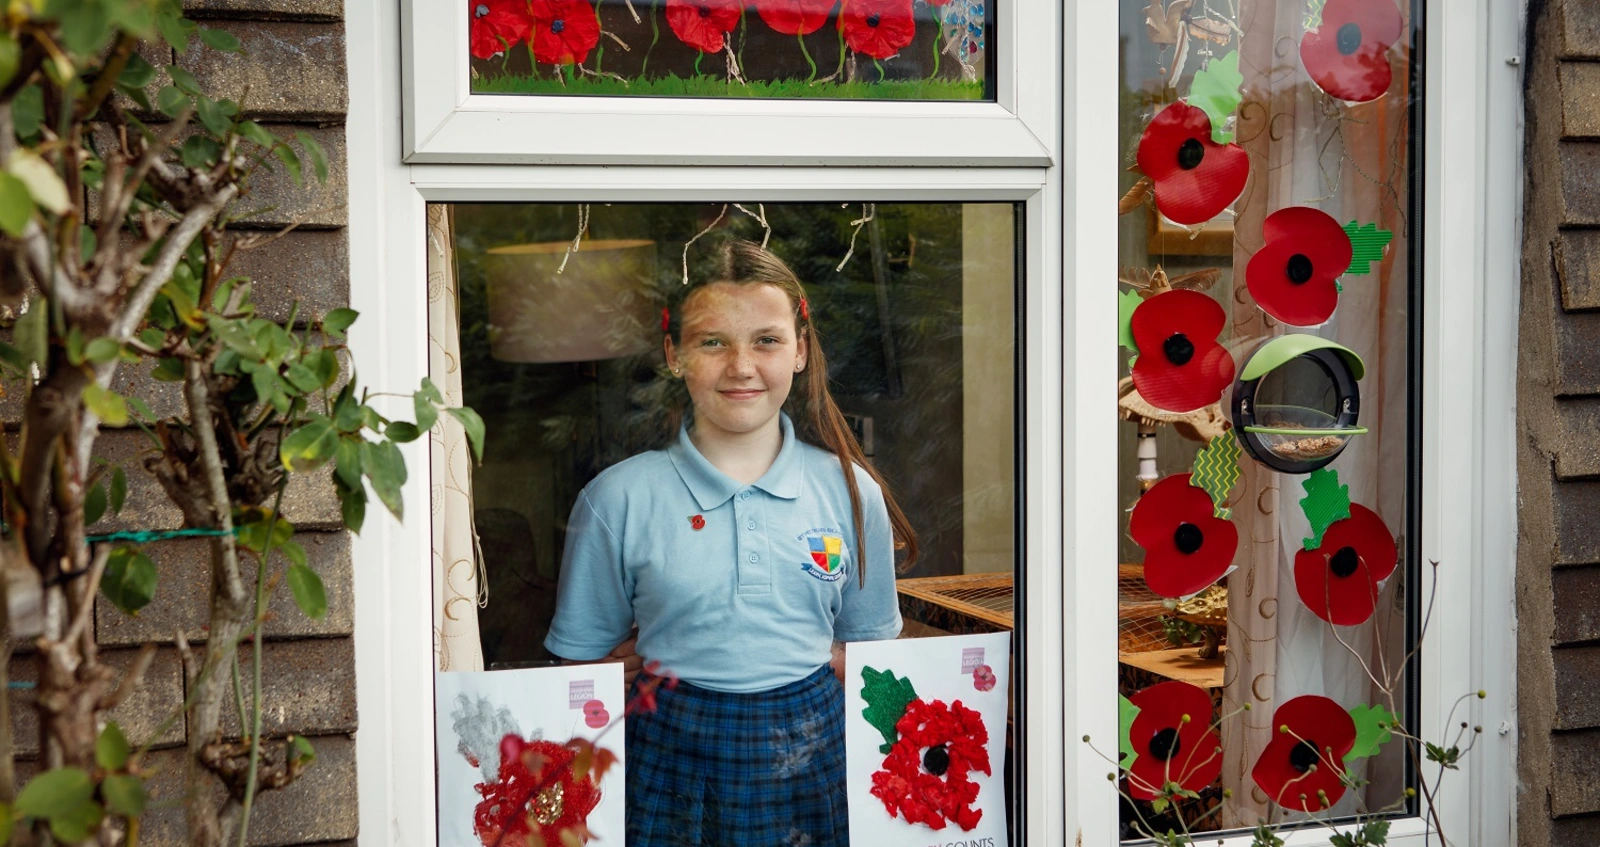 Poppy Railton at her window with poppy posters she has decorated